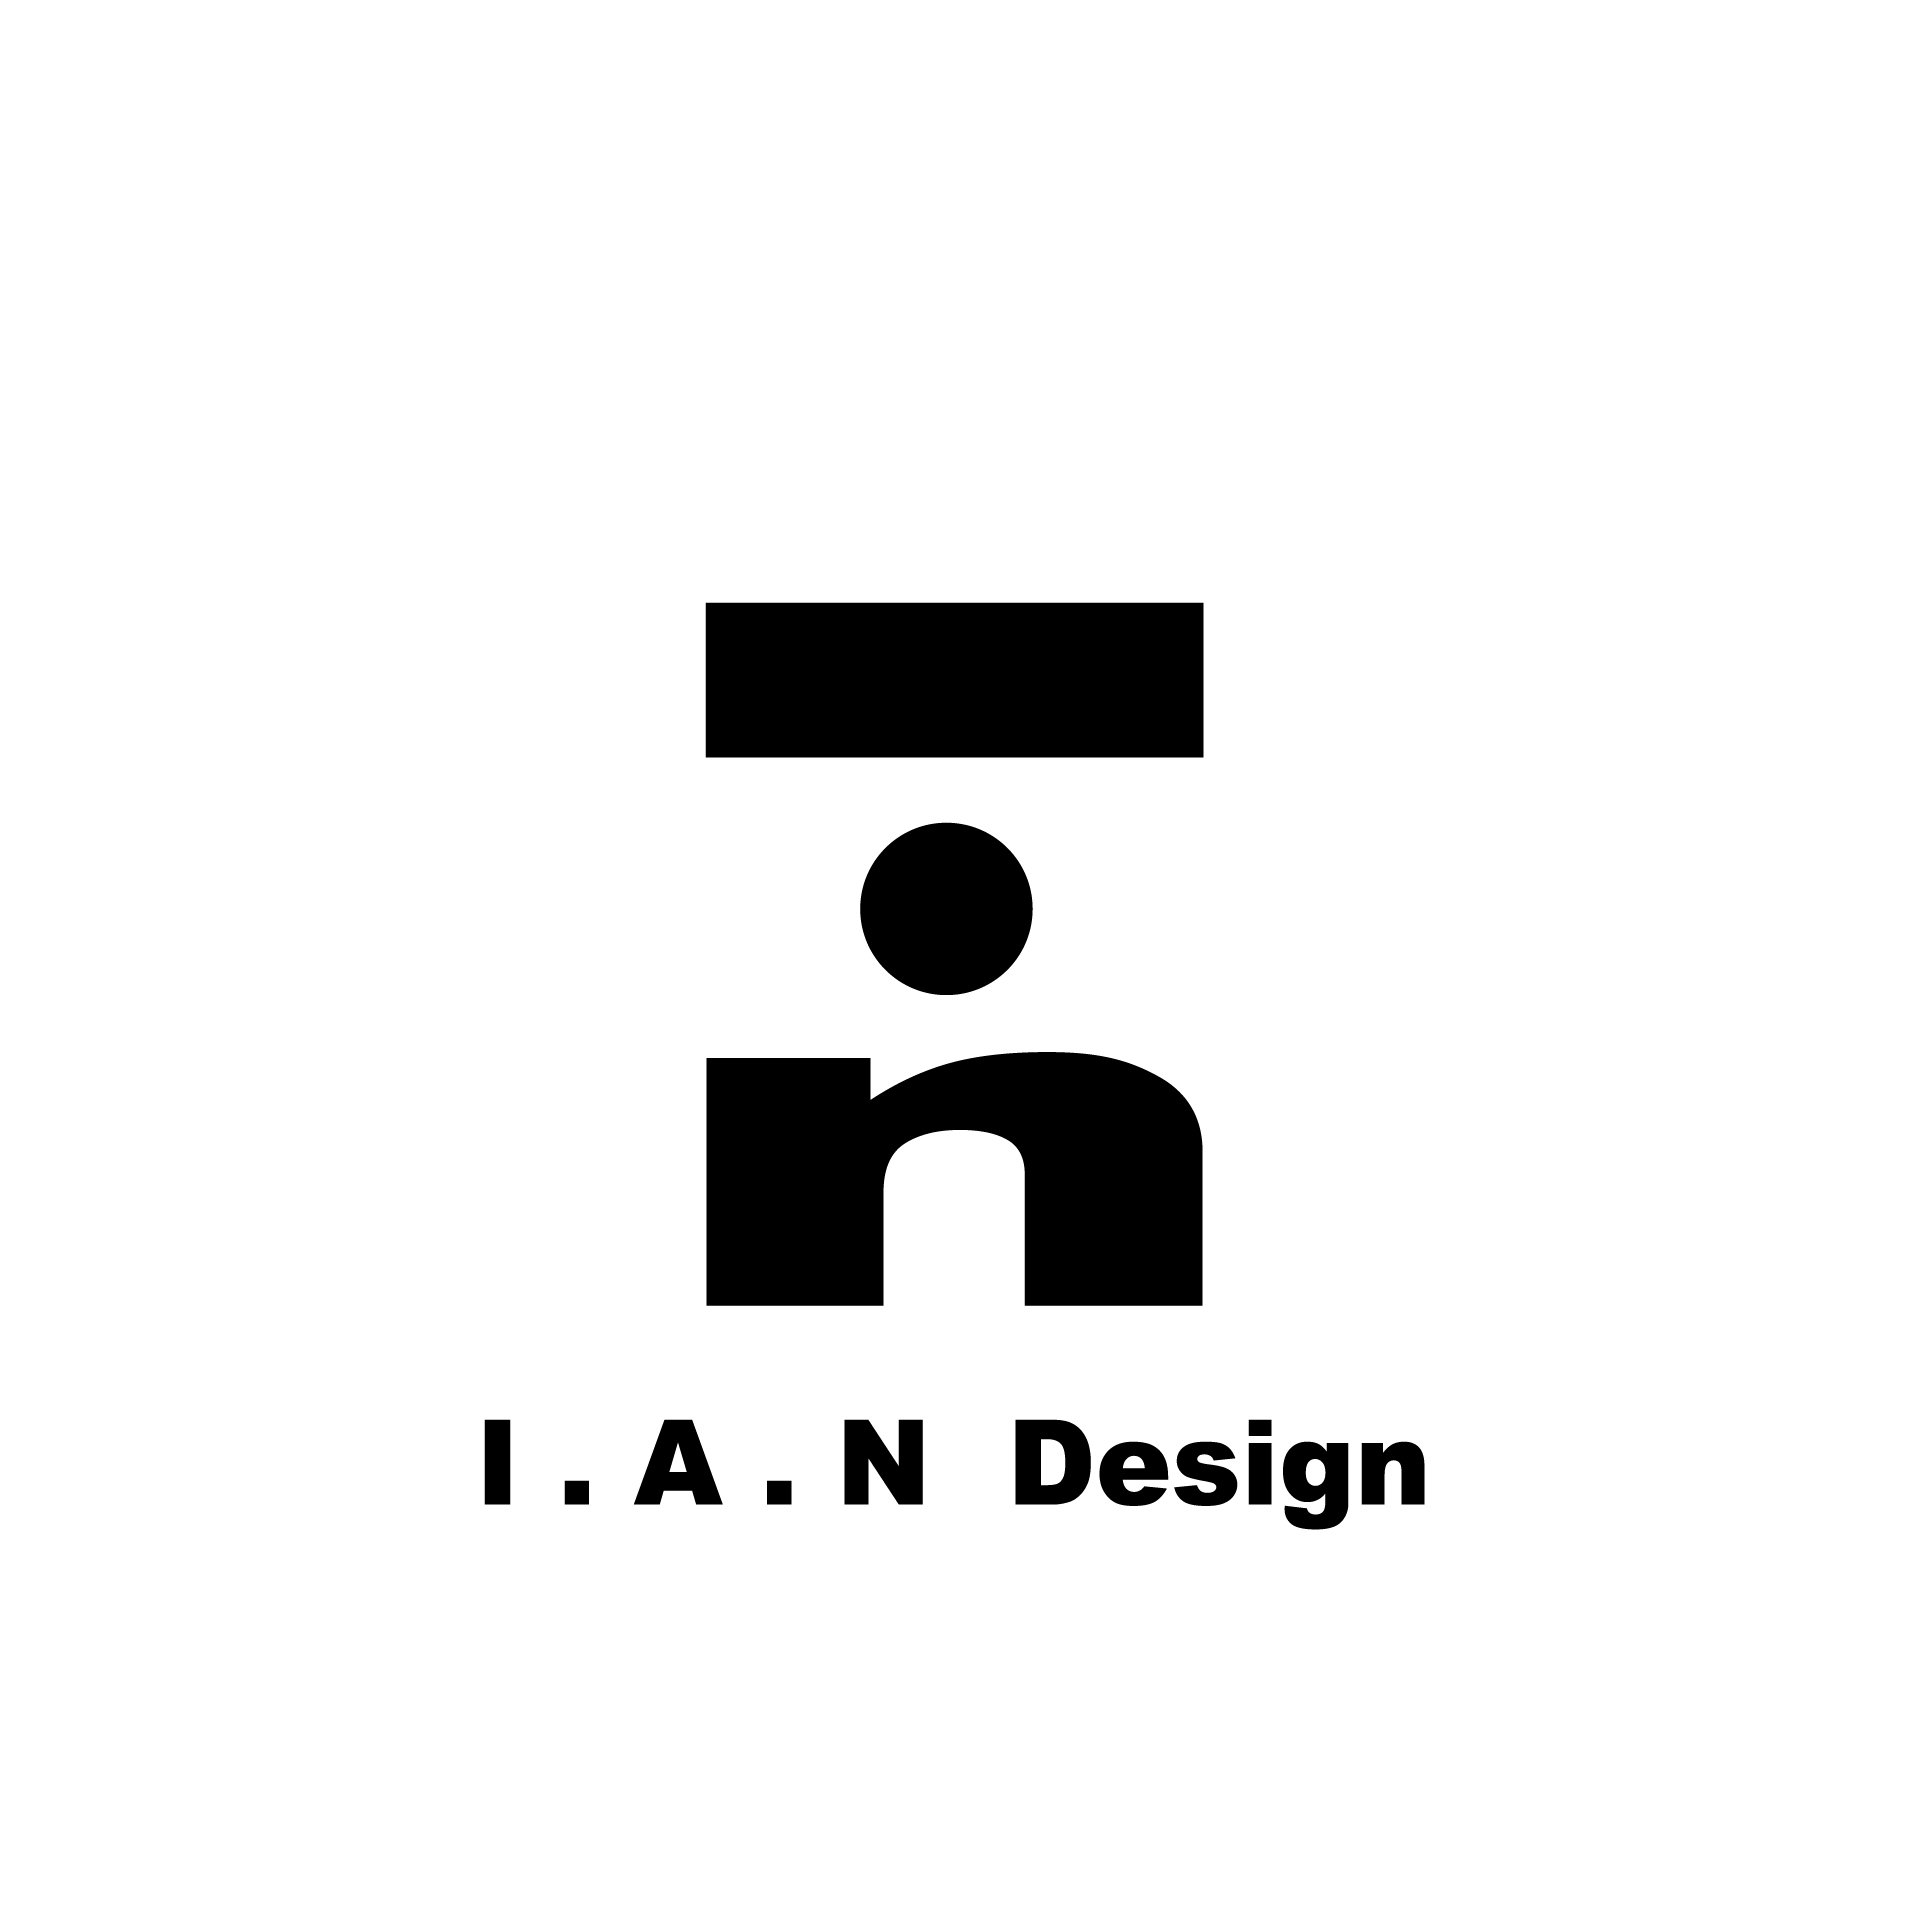 I.A.N Design - Certified B Corporation in Taiwan